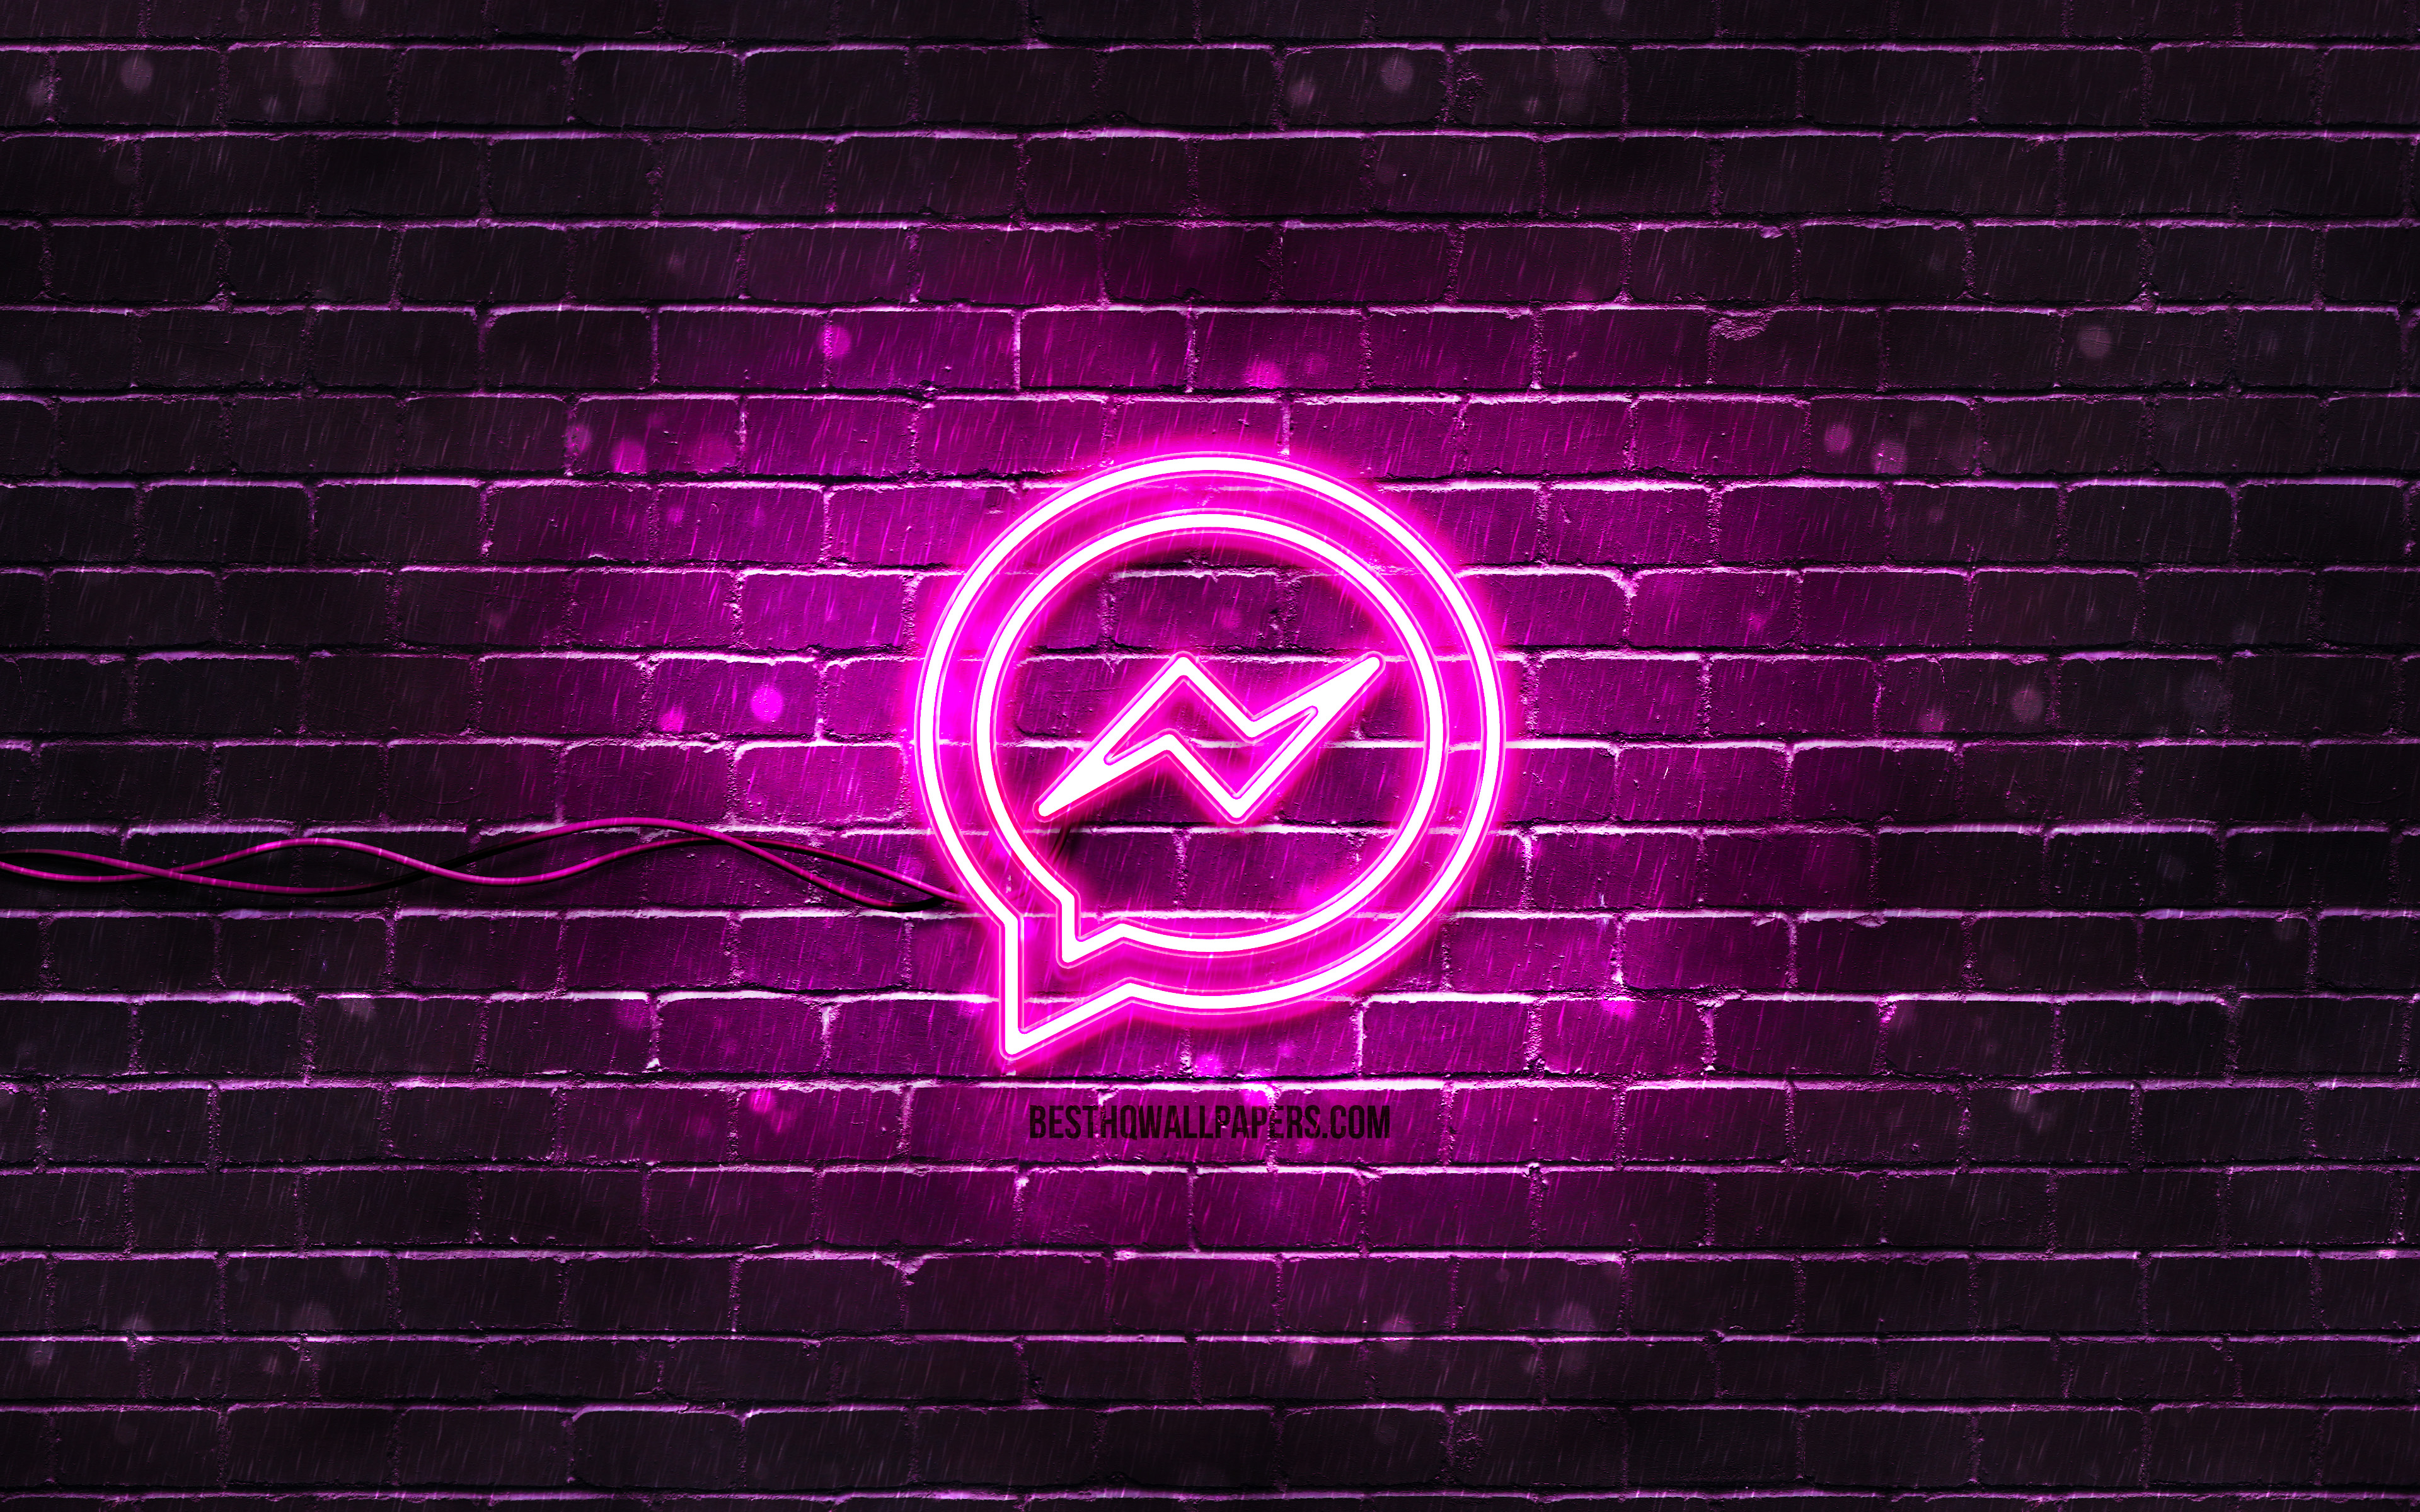 Download wallpaper Facebook Messenger purple logo, 4k, purple brickwall, Facebook Messenger logo, messengers, Facebook Messenger neon logo, Facebook Messenger for desktop with resolution 3840x2400. High Quality HD picture wallpaper